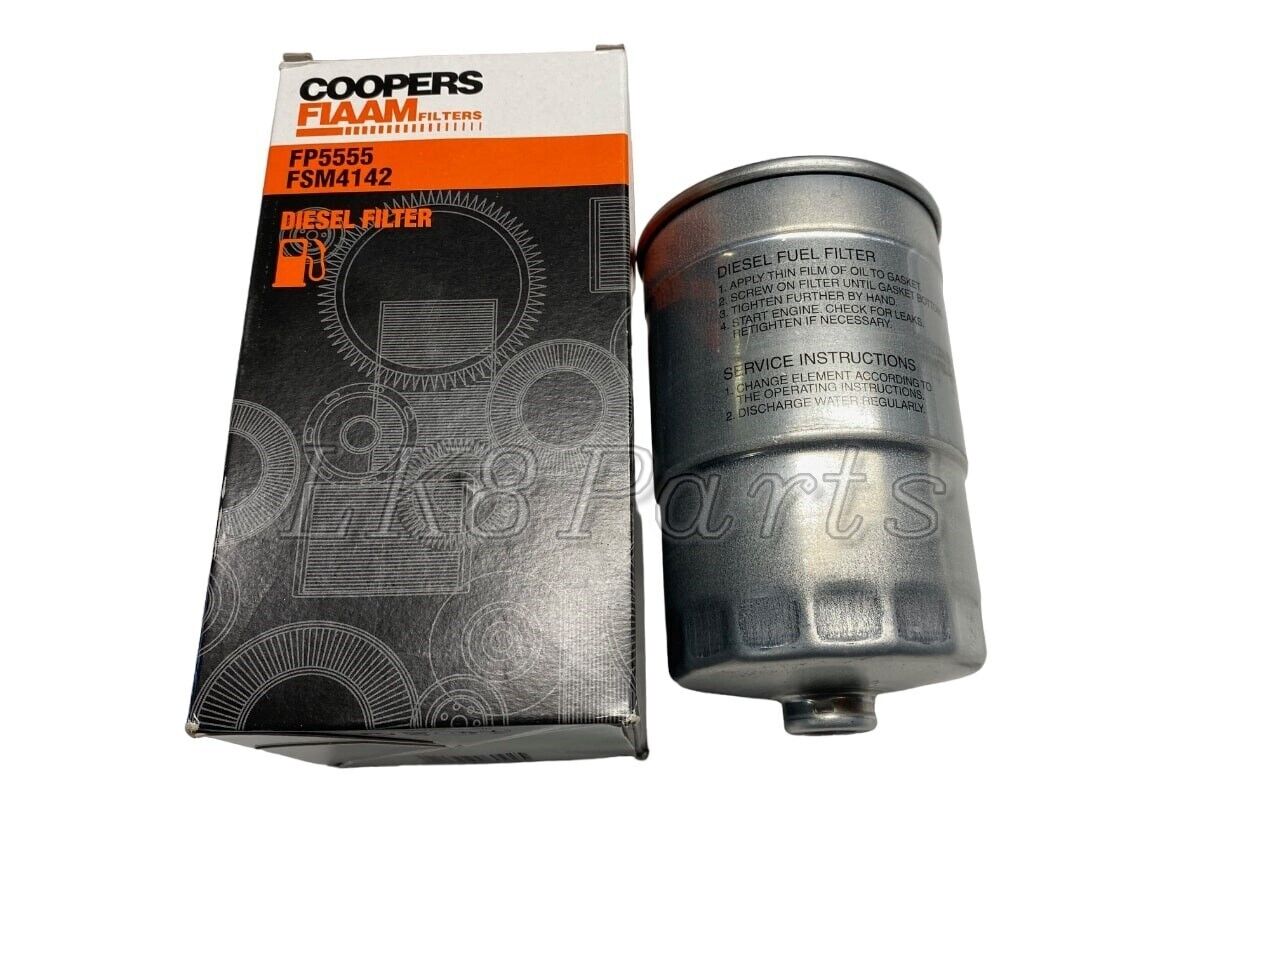 Land Rover Discovery II Defender Td5 Diesel Fuel Filter ESR4686 Coopers New